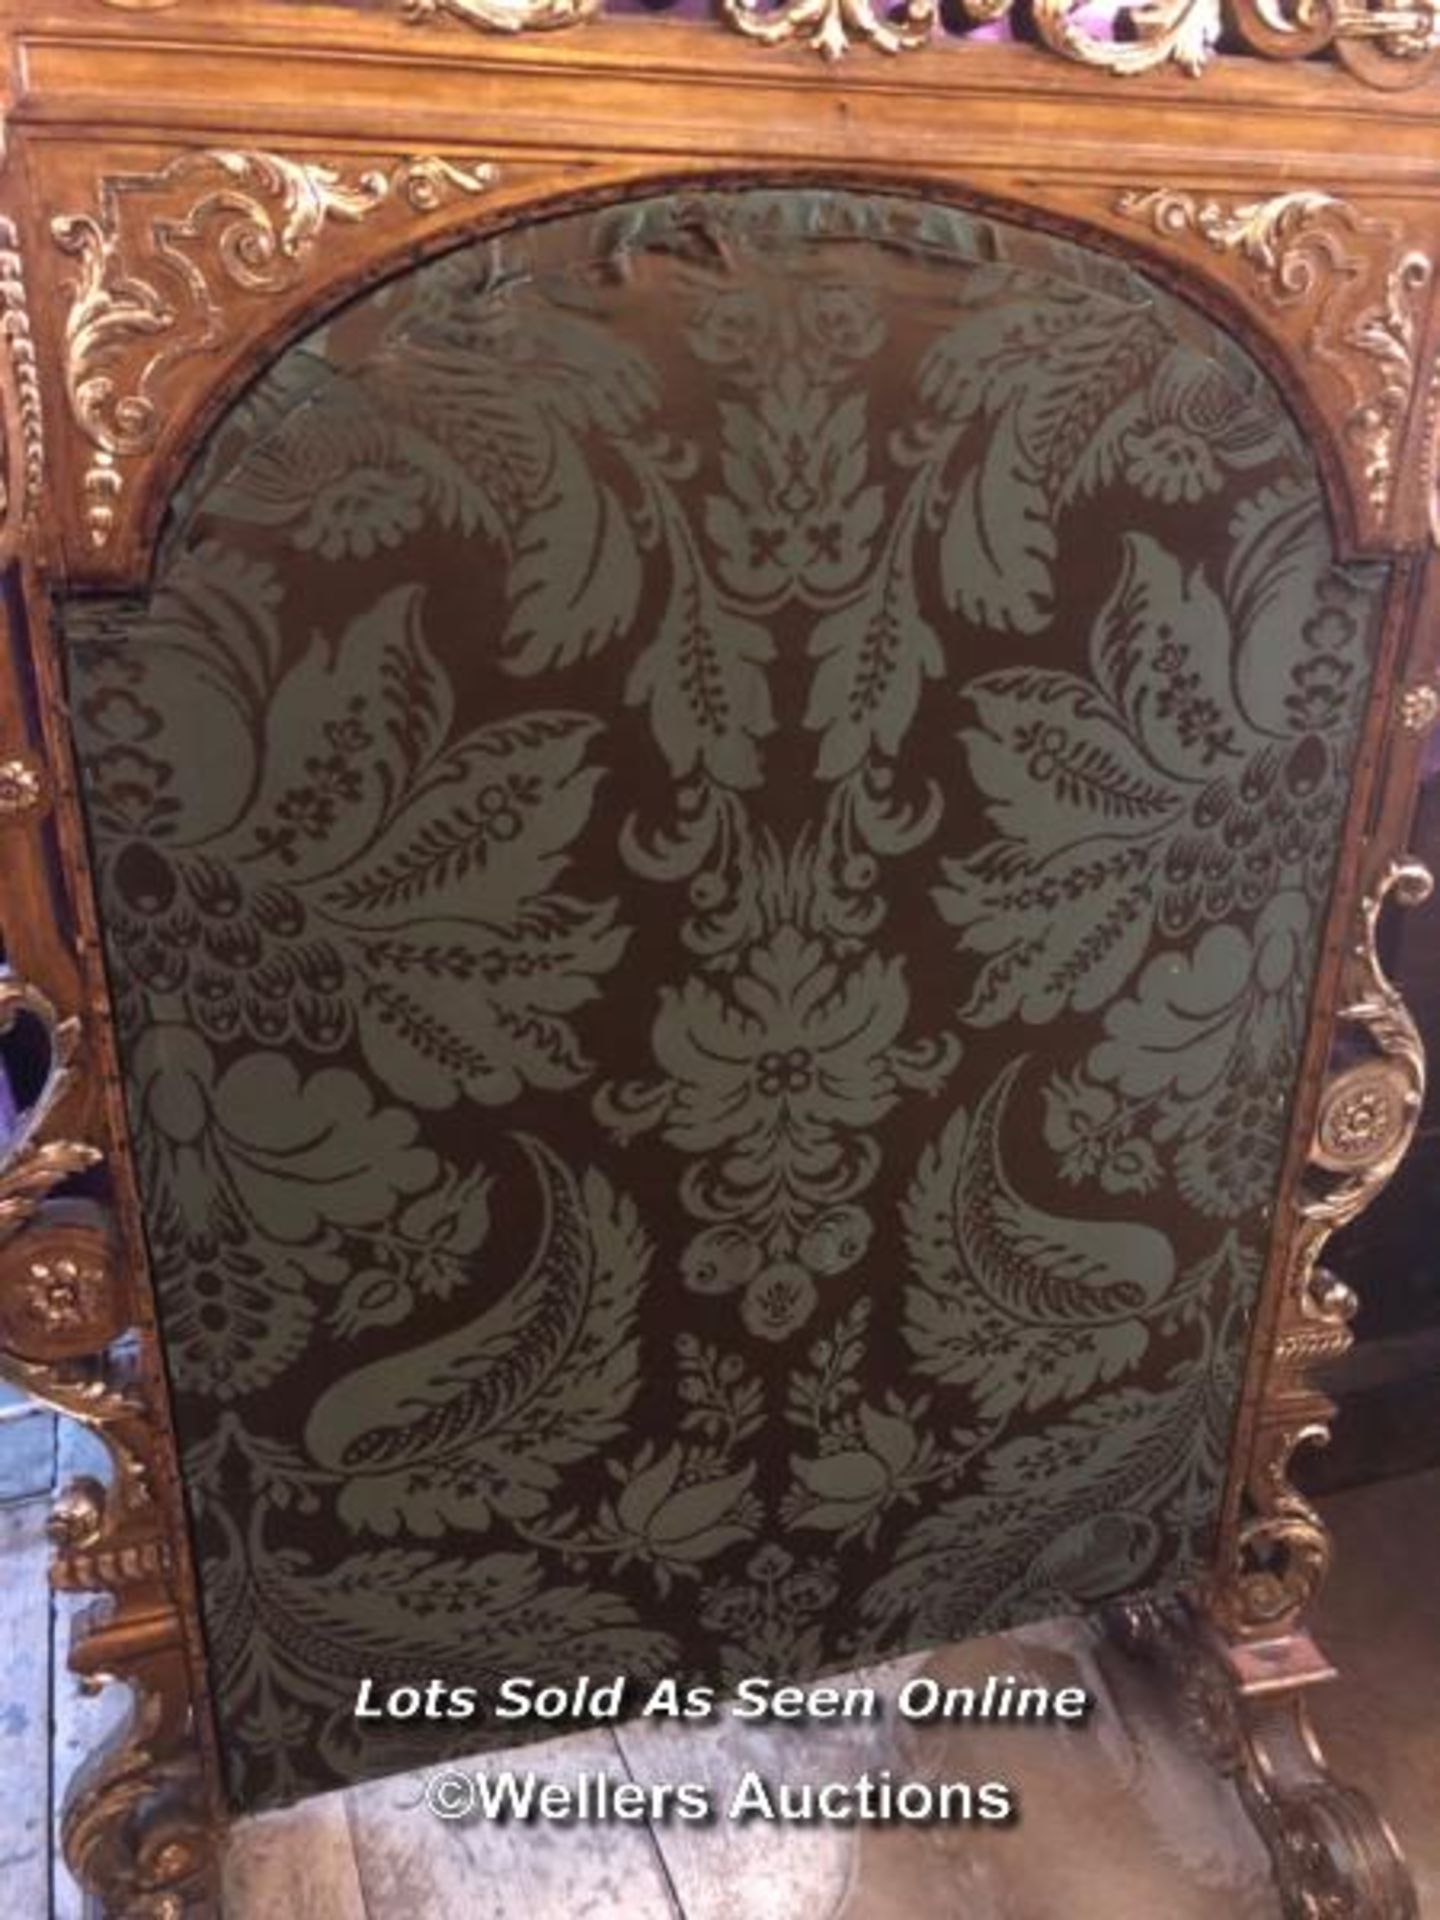 LARGE AND IMPRESSIVE FIRE SCREEN, ITALIAN ORIGIN, WITH EXTENSIVE CARVING AND GILDING, 88 X 40 X - Image 2 of 9